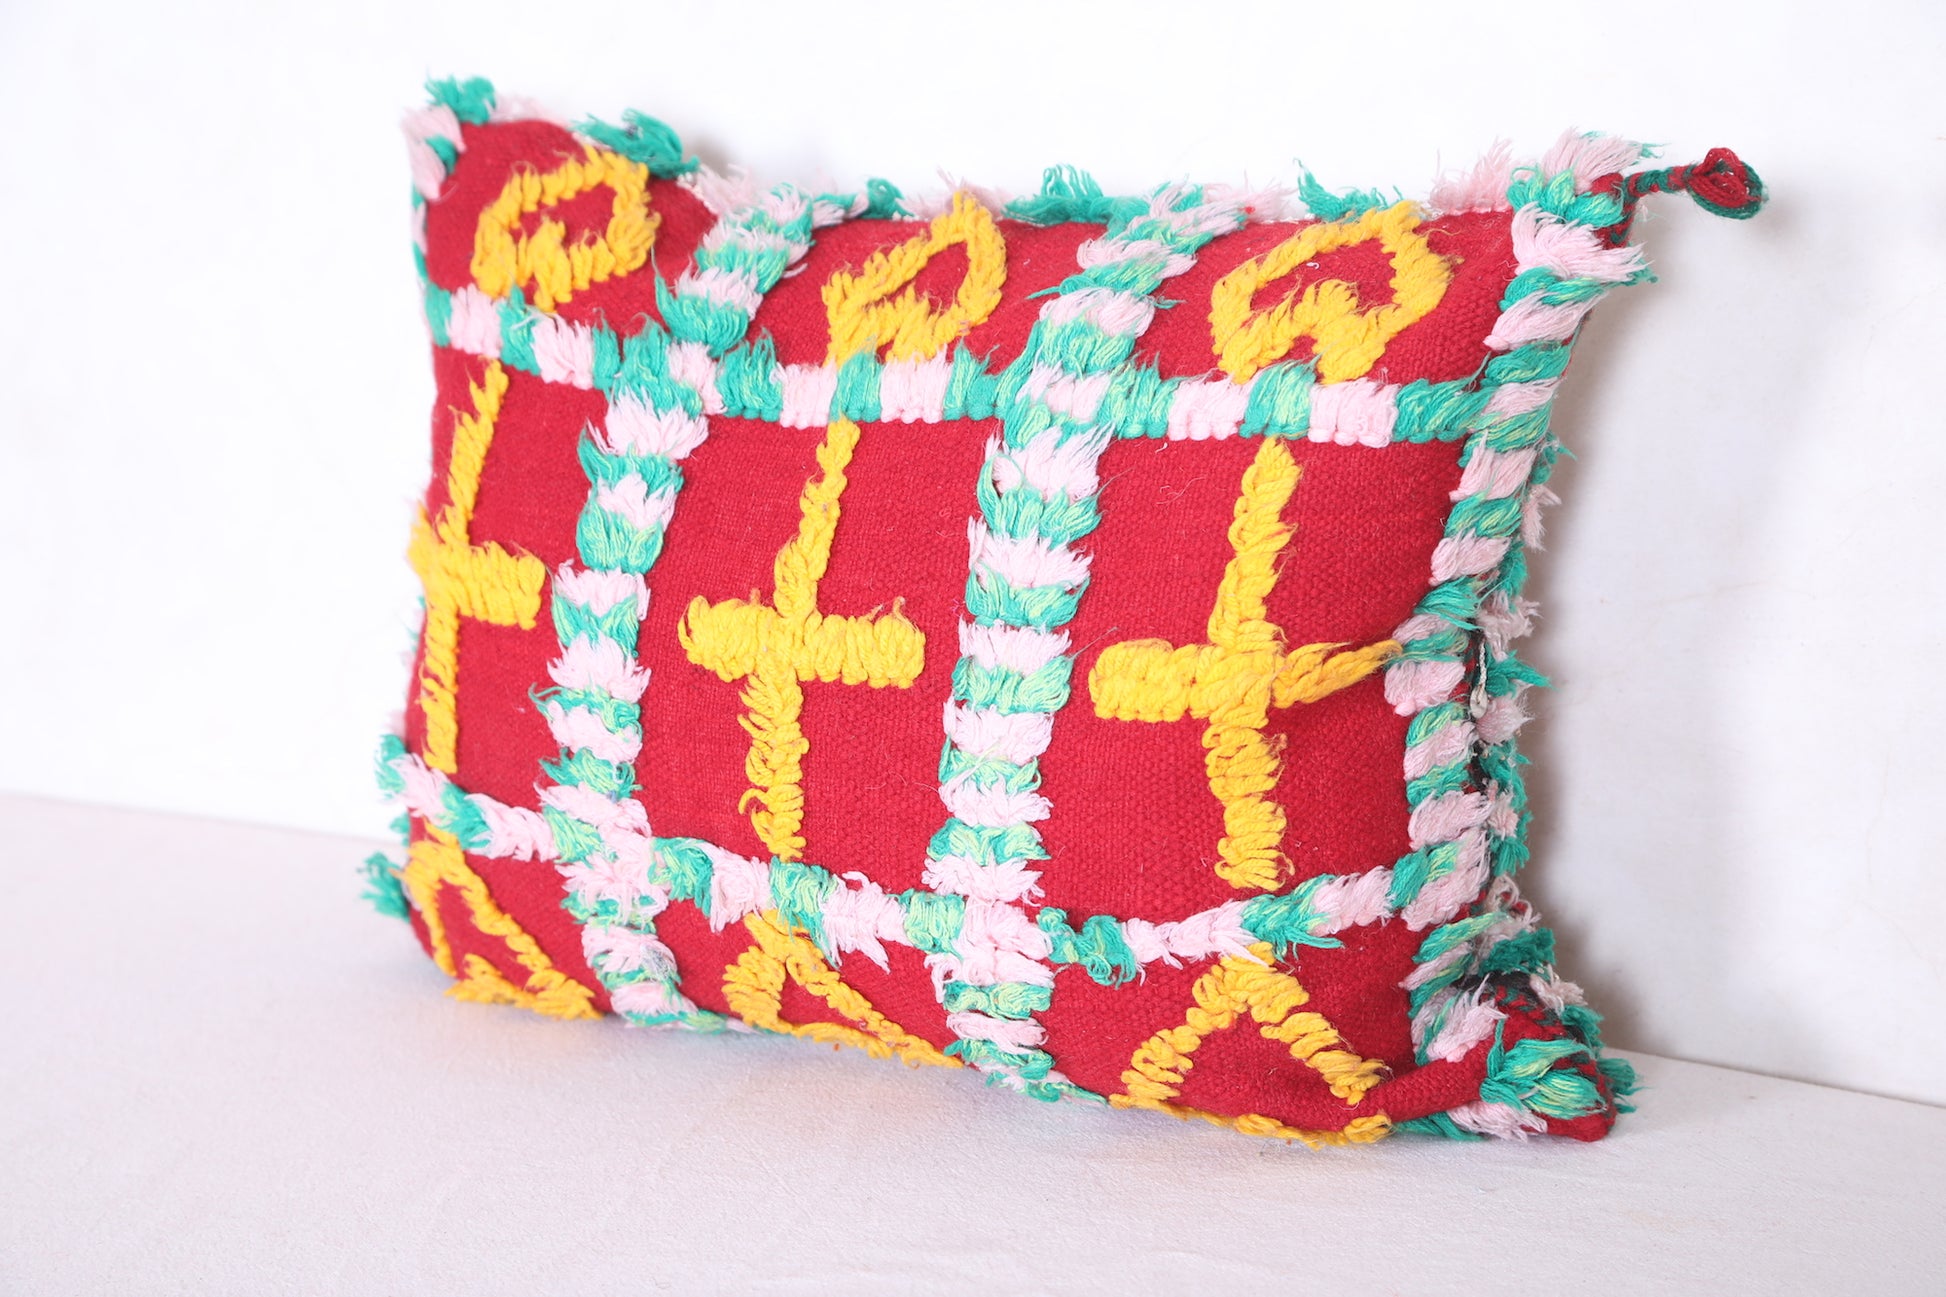 Moroccan handmade kilim pillow  13.7 INCHES X 18.5 INCHES